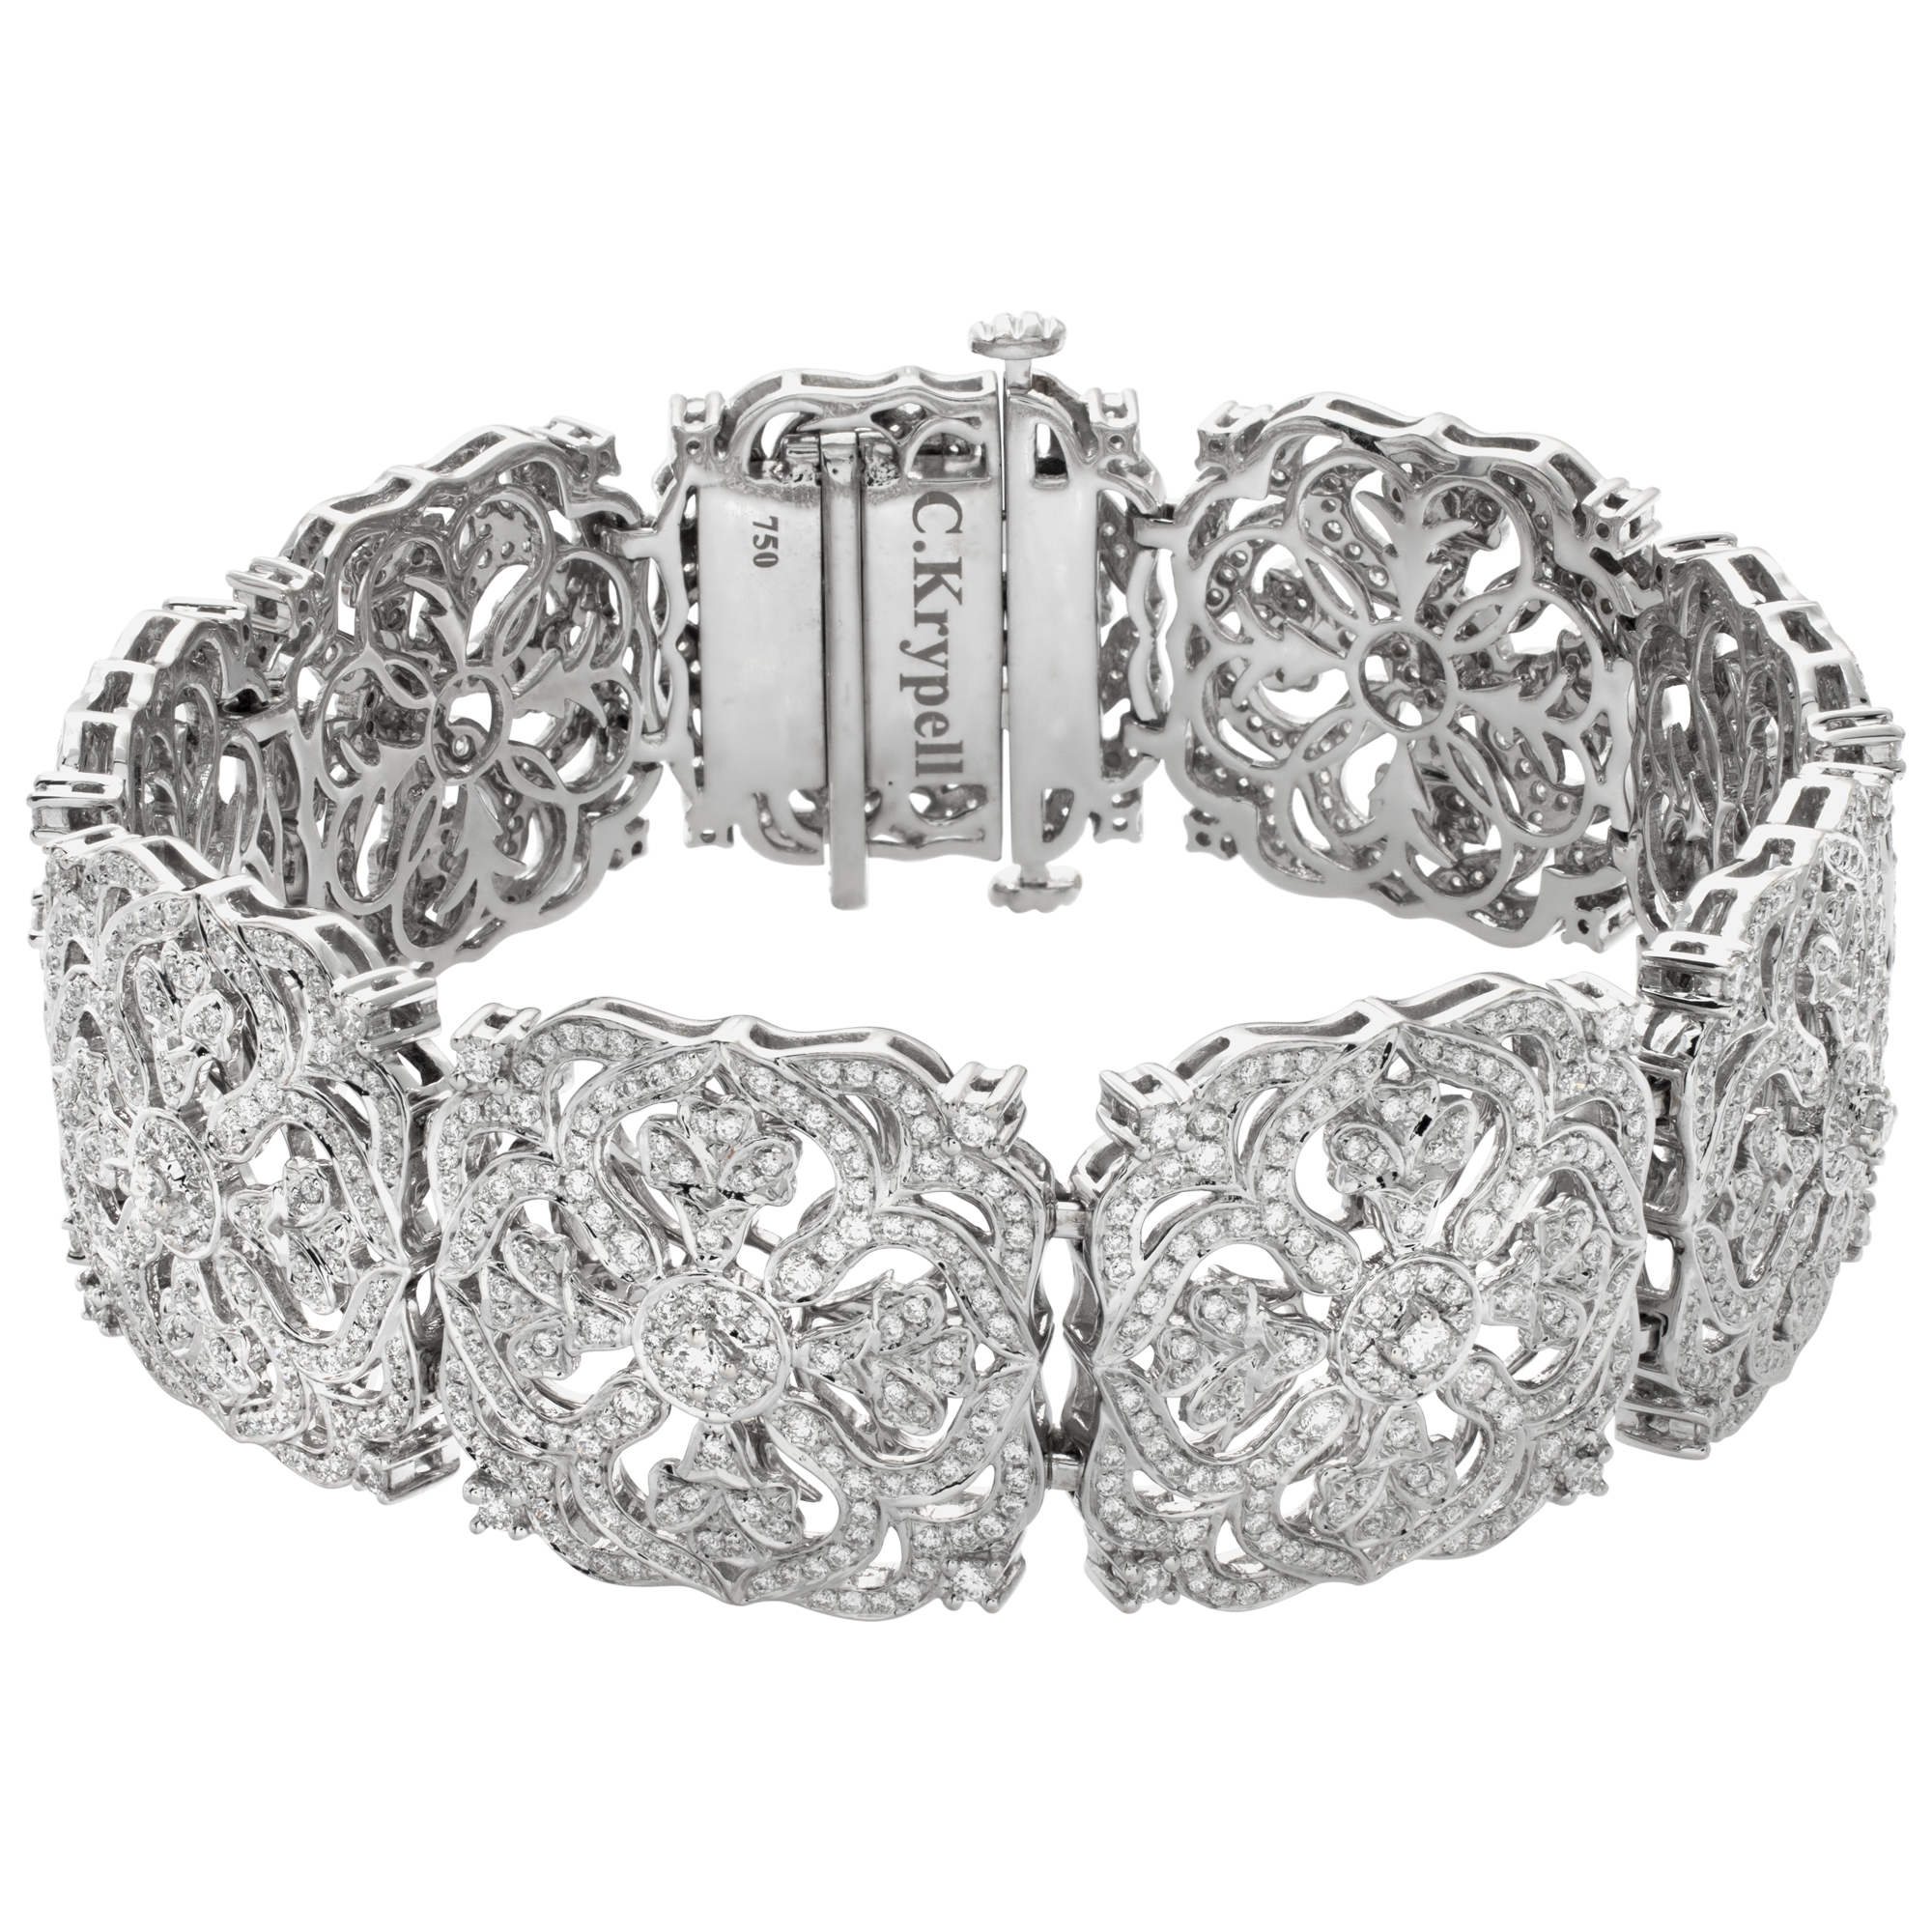 Charles Krypell diamond pave floral amulet bracelet in 18k white gold with approximately 9 carats in G-H, VS diamonds image 1